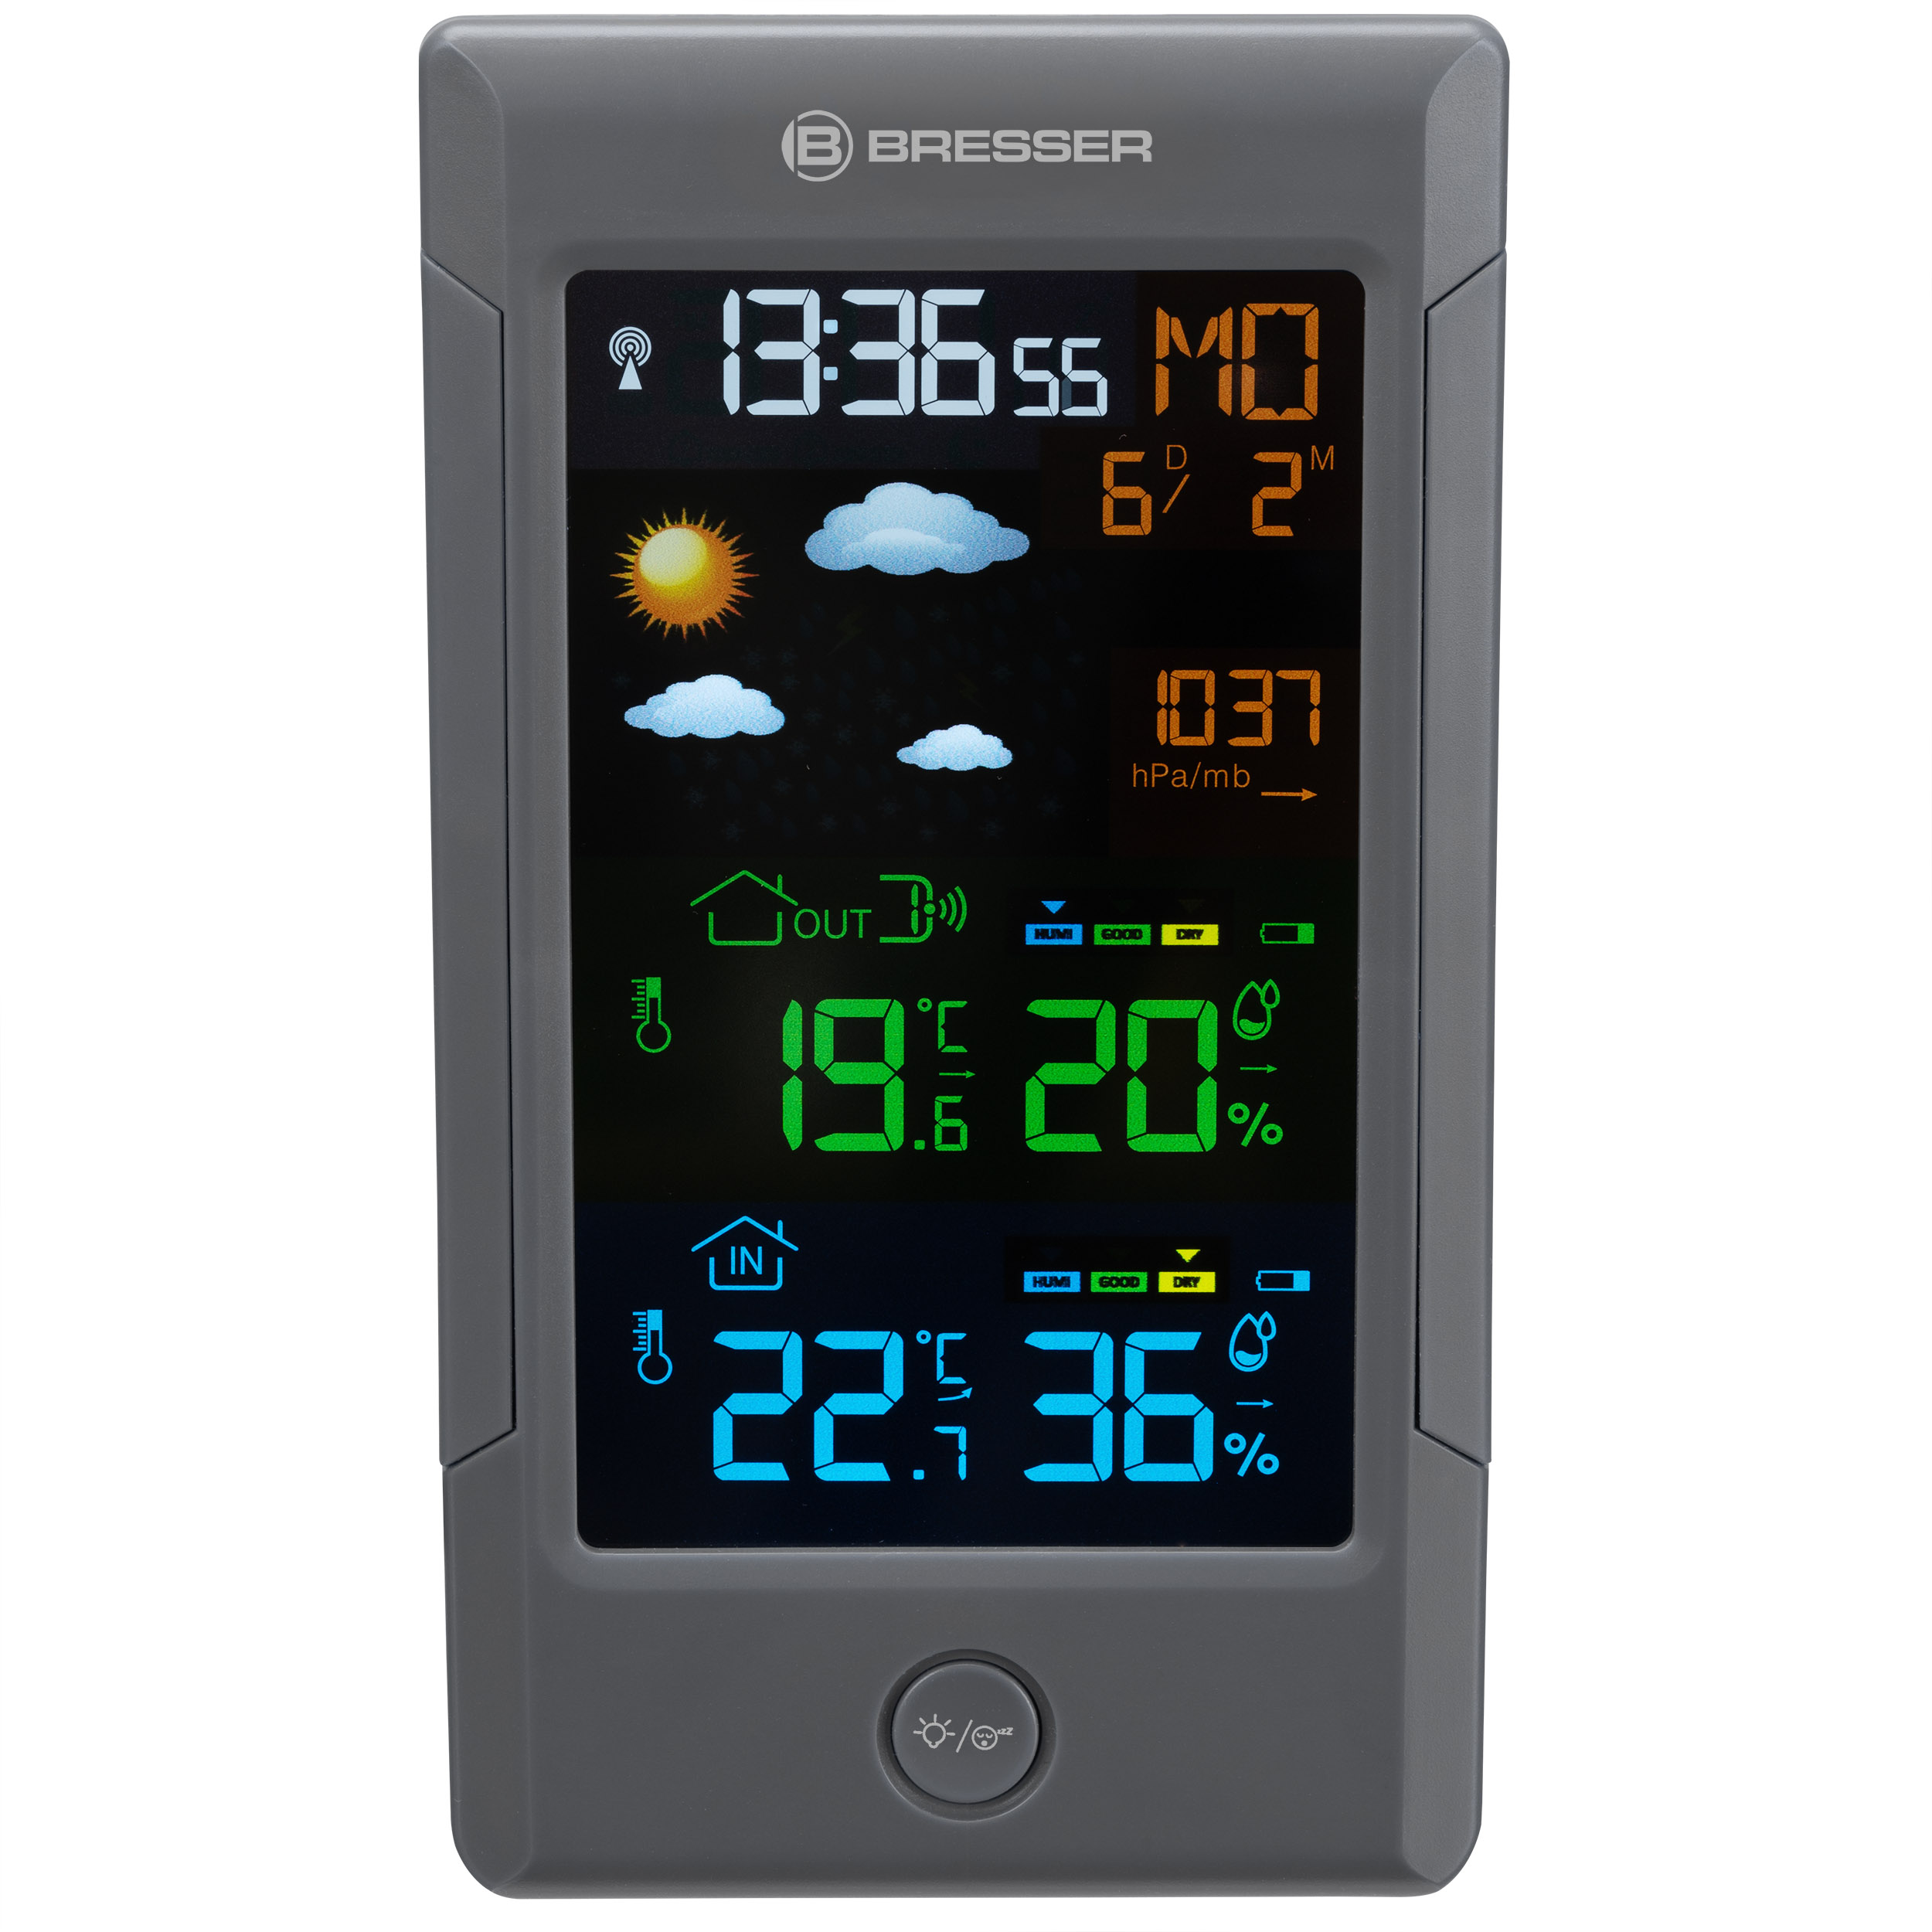 BRESSER ClimateTemp NBF Colour weather station with radio-controlled DCF clock